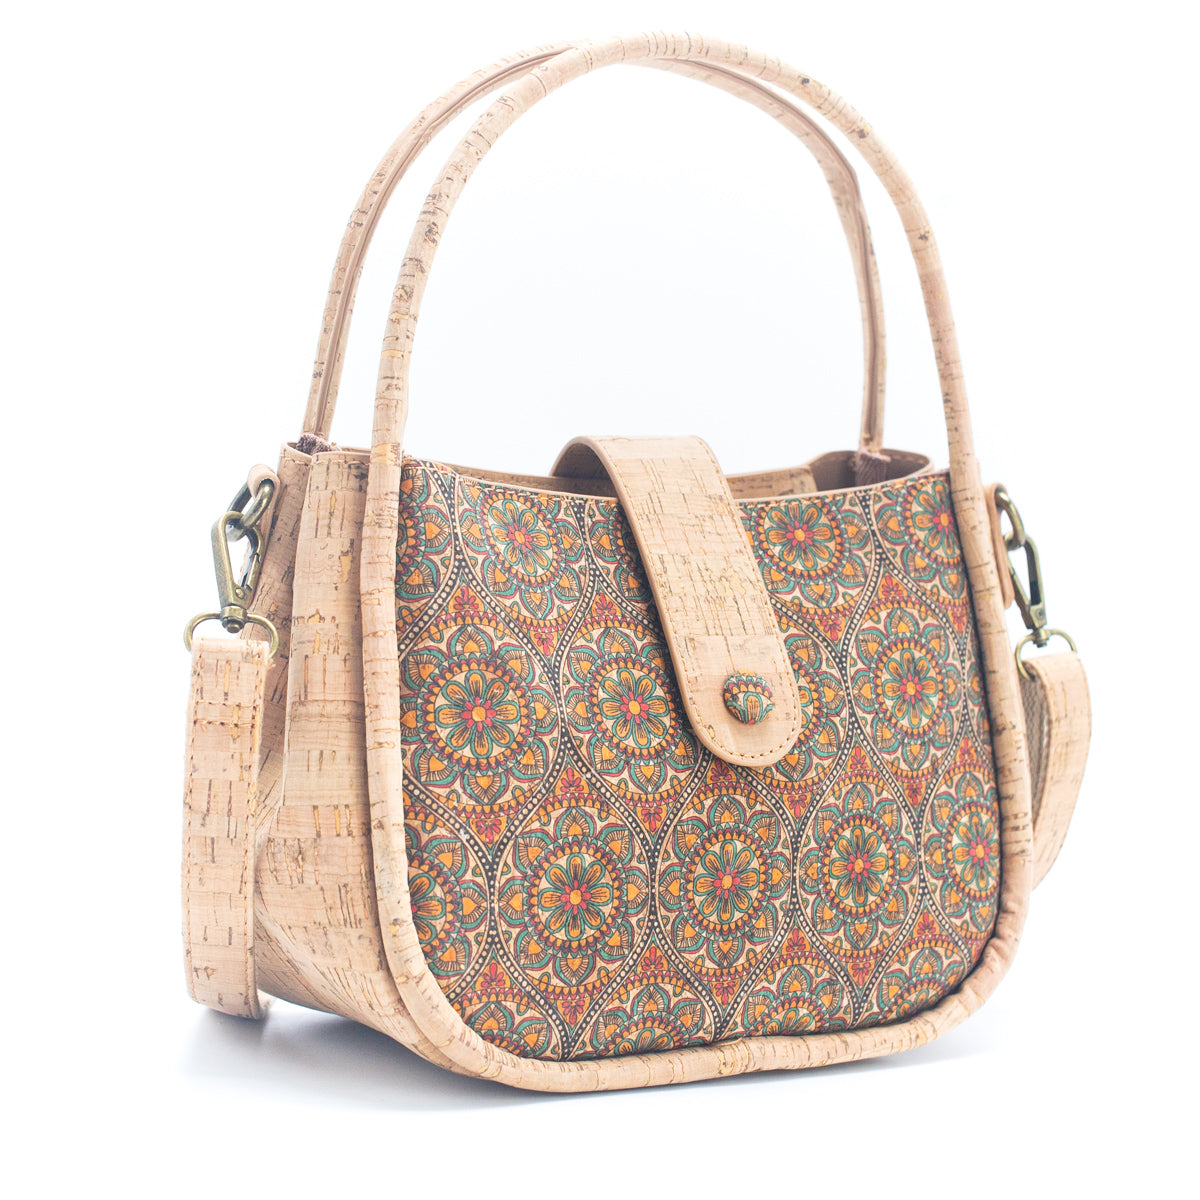 Natural Cork & Printed Pattern Women's Tote Crossbody Bag | THE CORK COLLECTION